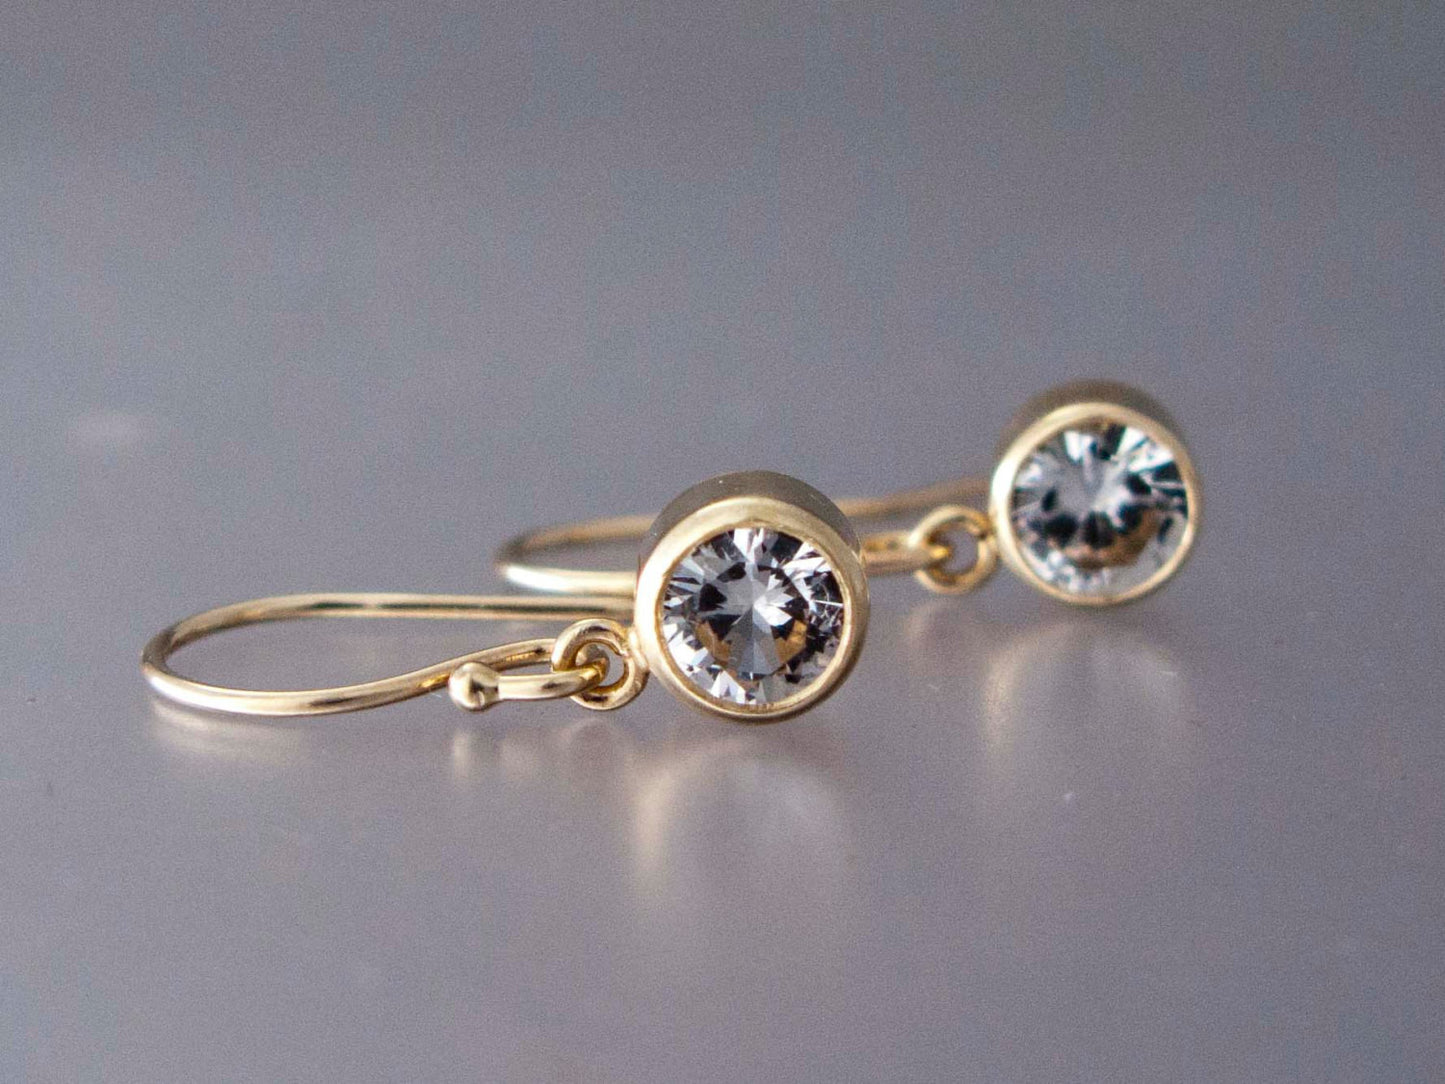 White Sapphire Gold Drop Earrings, 5mm bezel set sapphires in 14k white or yellow gold